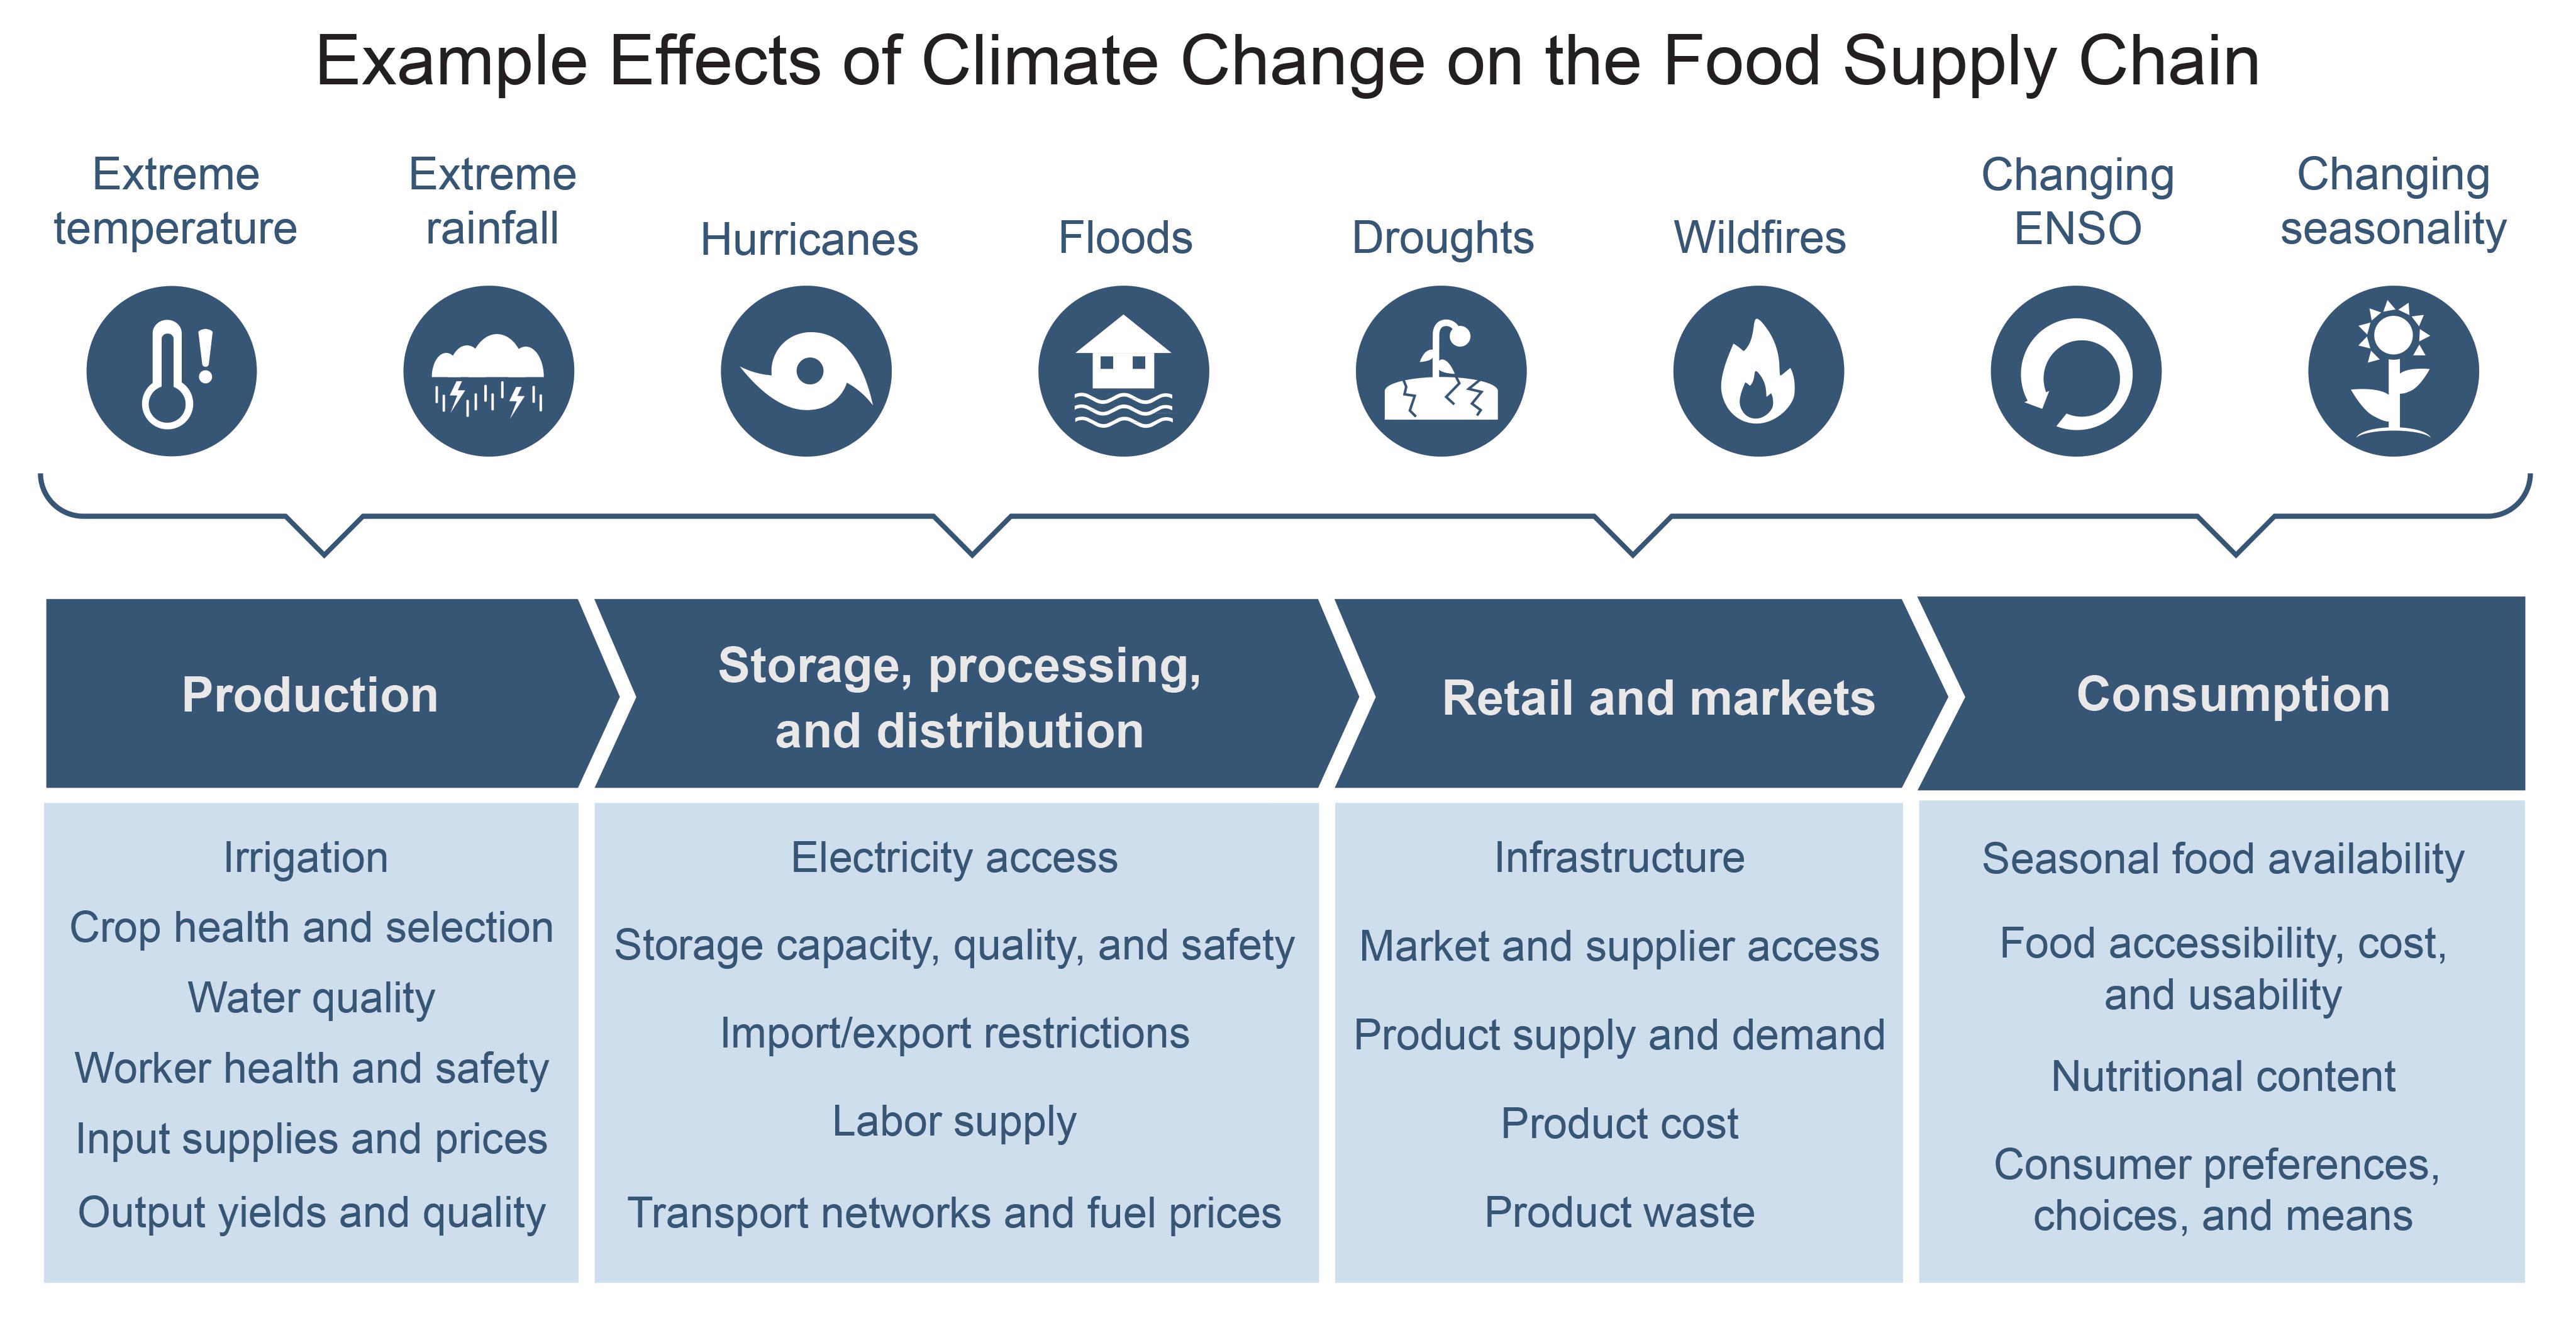 Example Effects of Climate Change on the Food Supply Chain